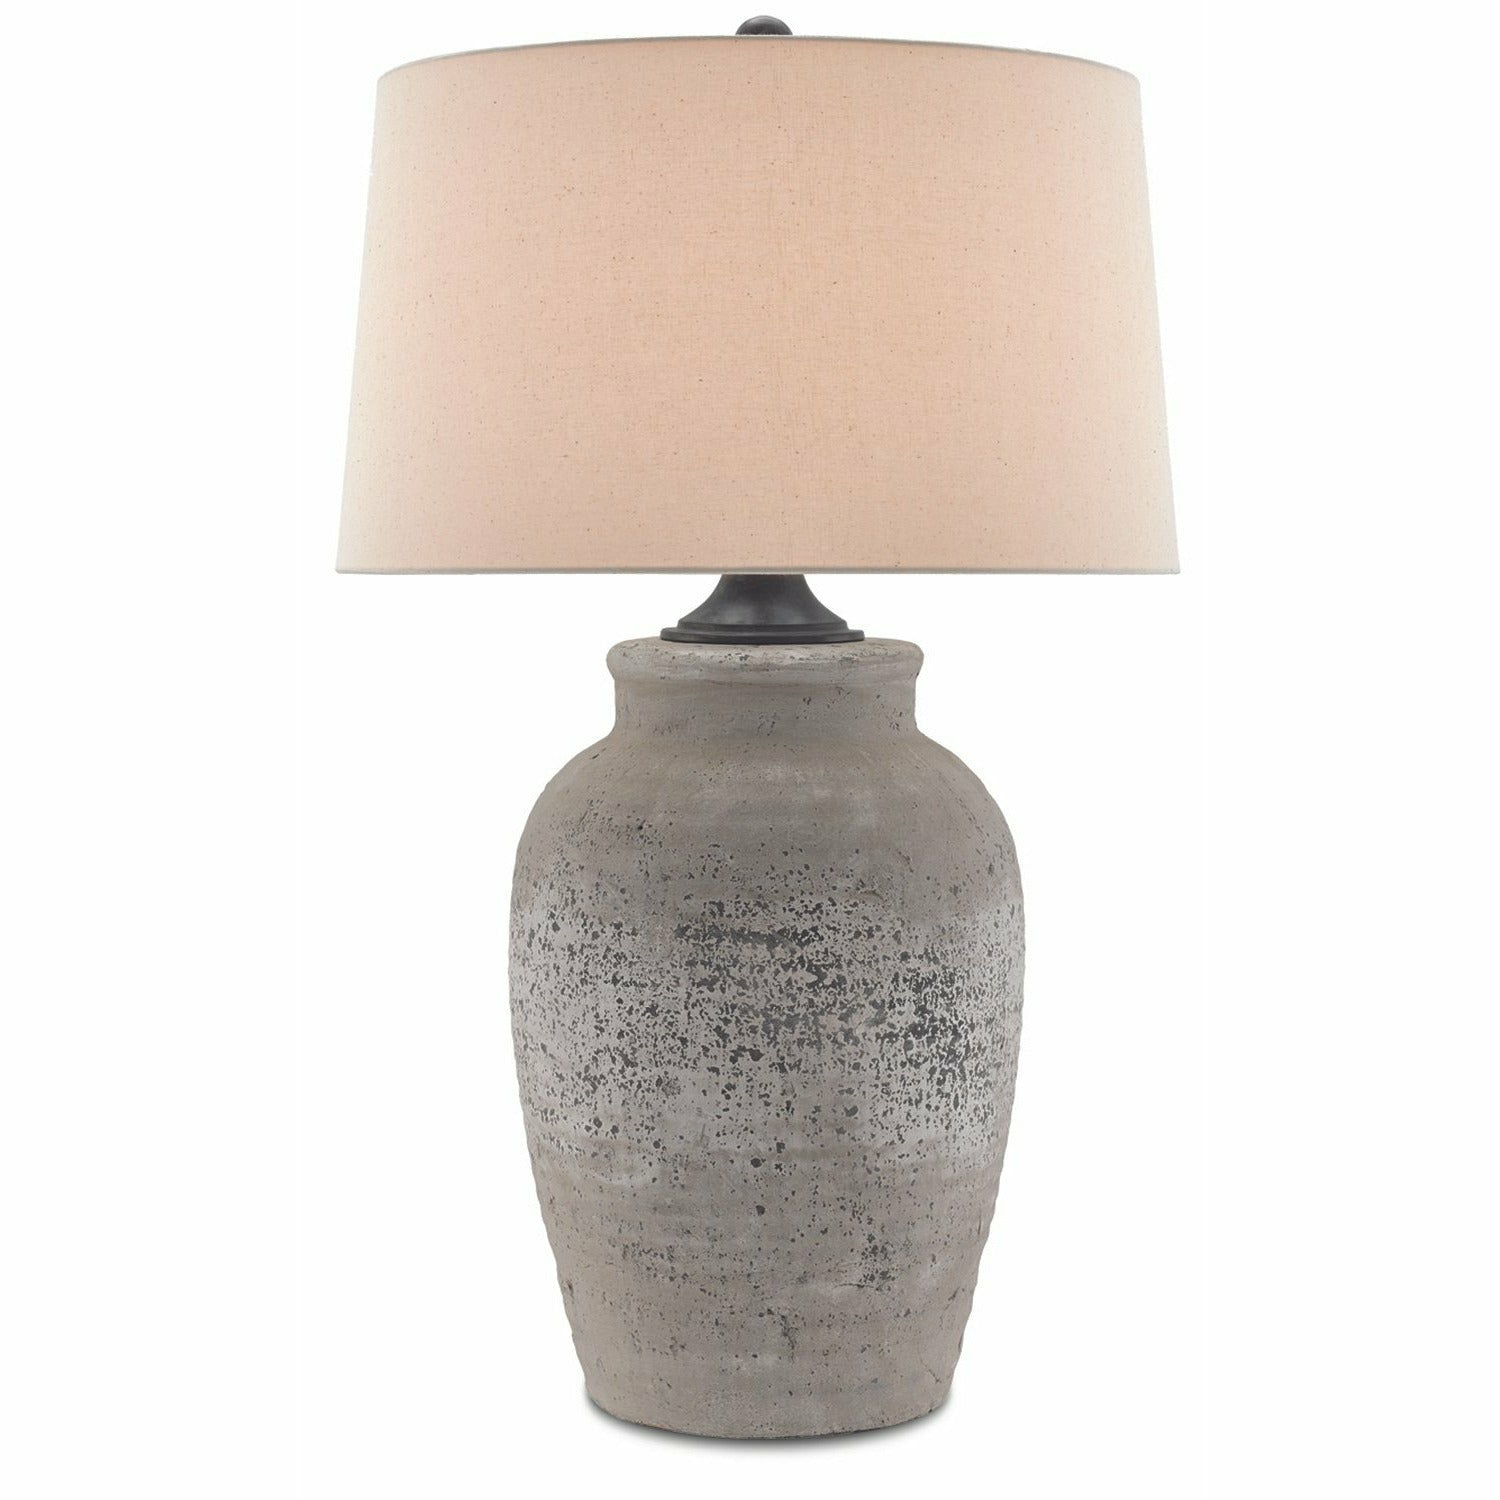 Currey & Company, Quest Table Lamp